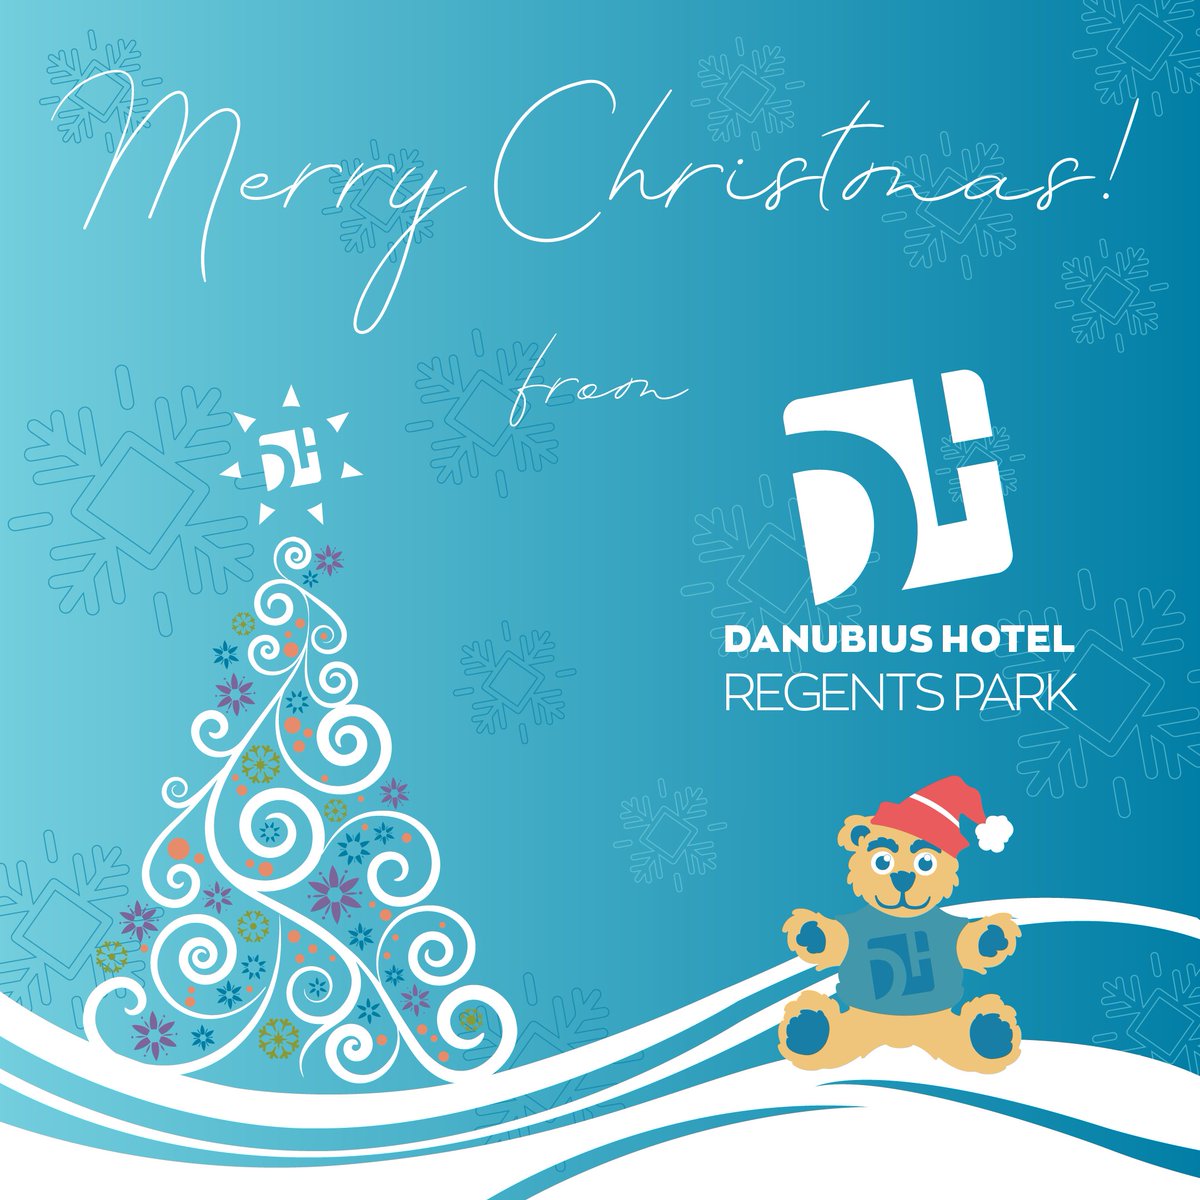 Merry Christmas! May you and your loved ones have a magical day, with love from Danubius Hotels. 💙🎅

#DanubiusLondon #MerryChristmas @DanubiusHotels